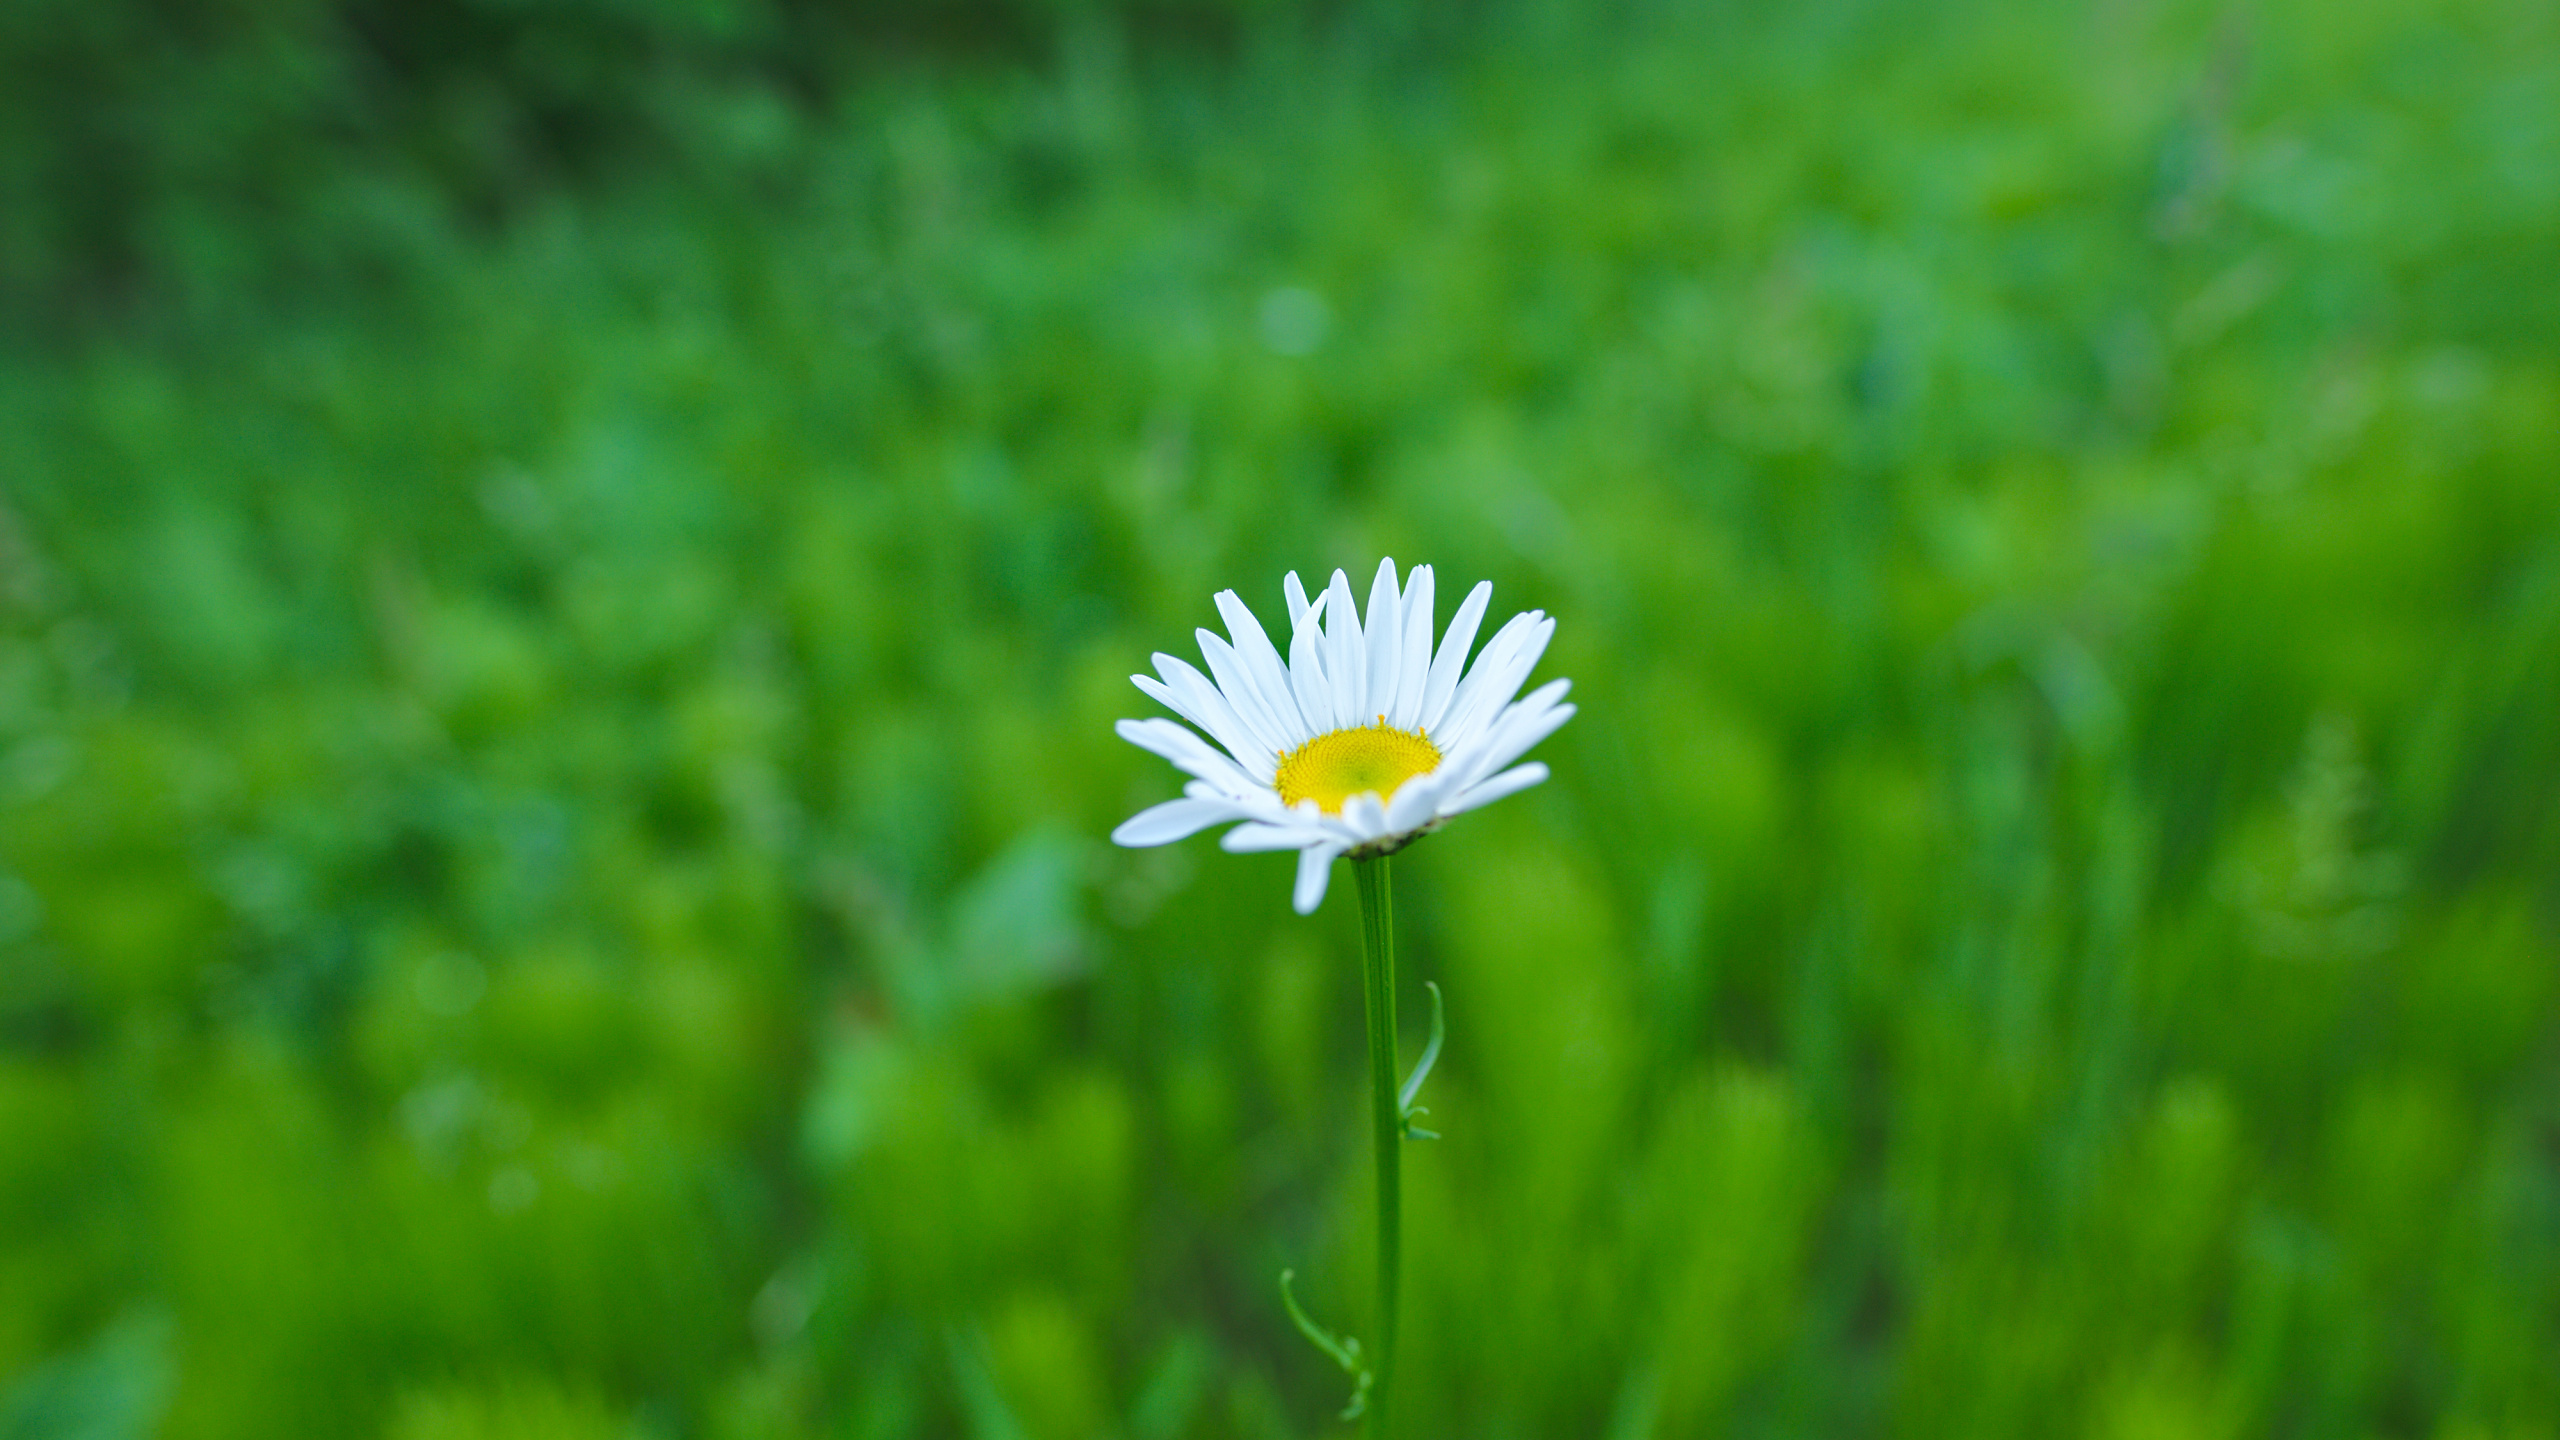 White Daisy in Bloom During Daytime. Wallpaper in 2560x1440 Resolution